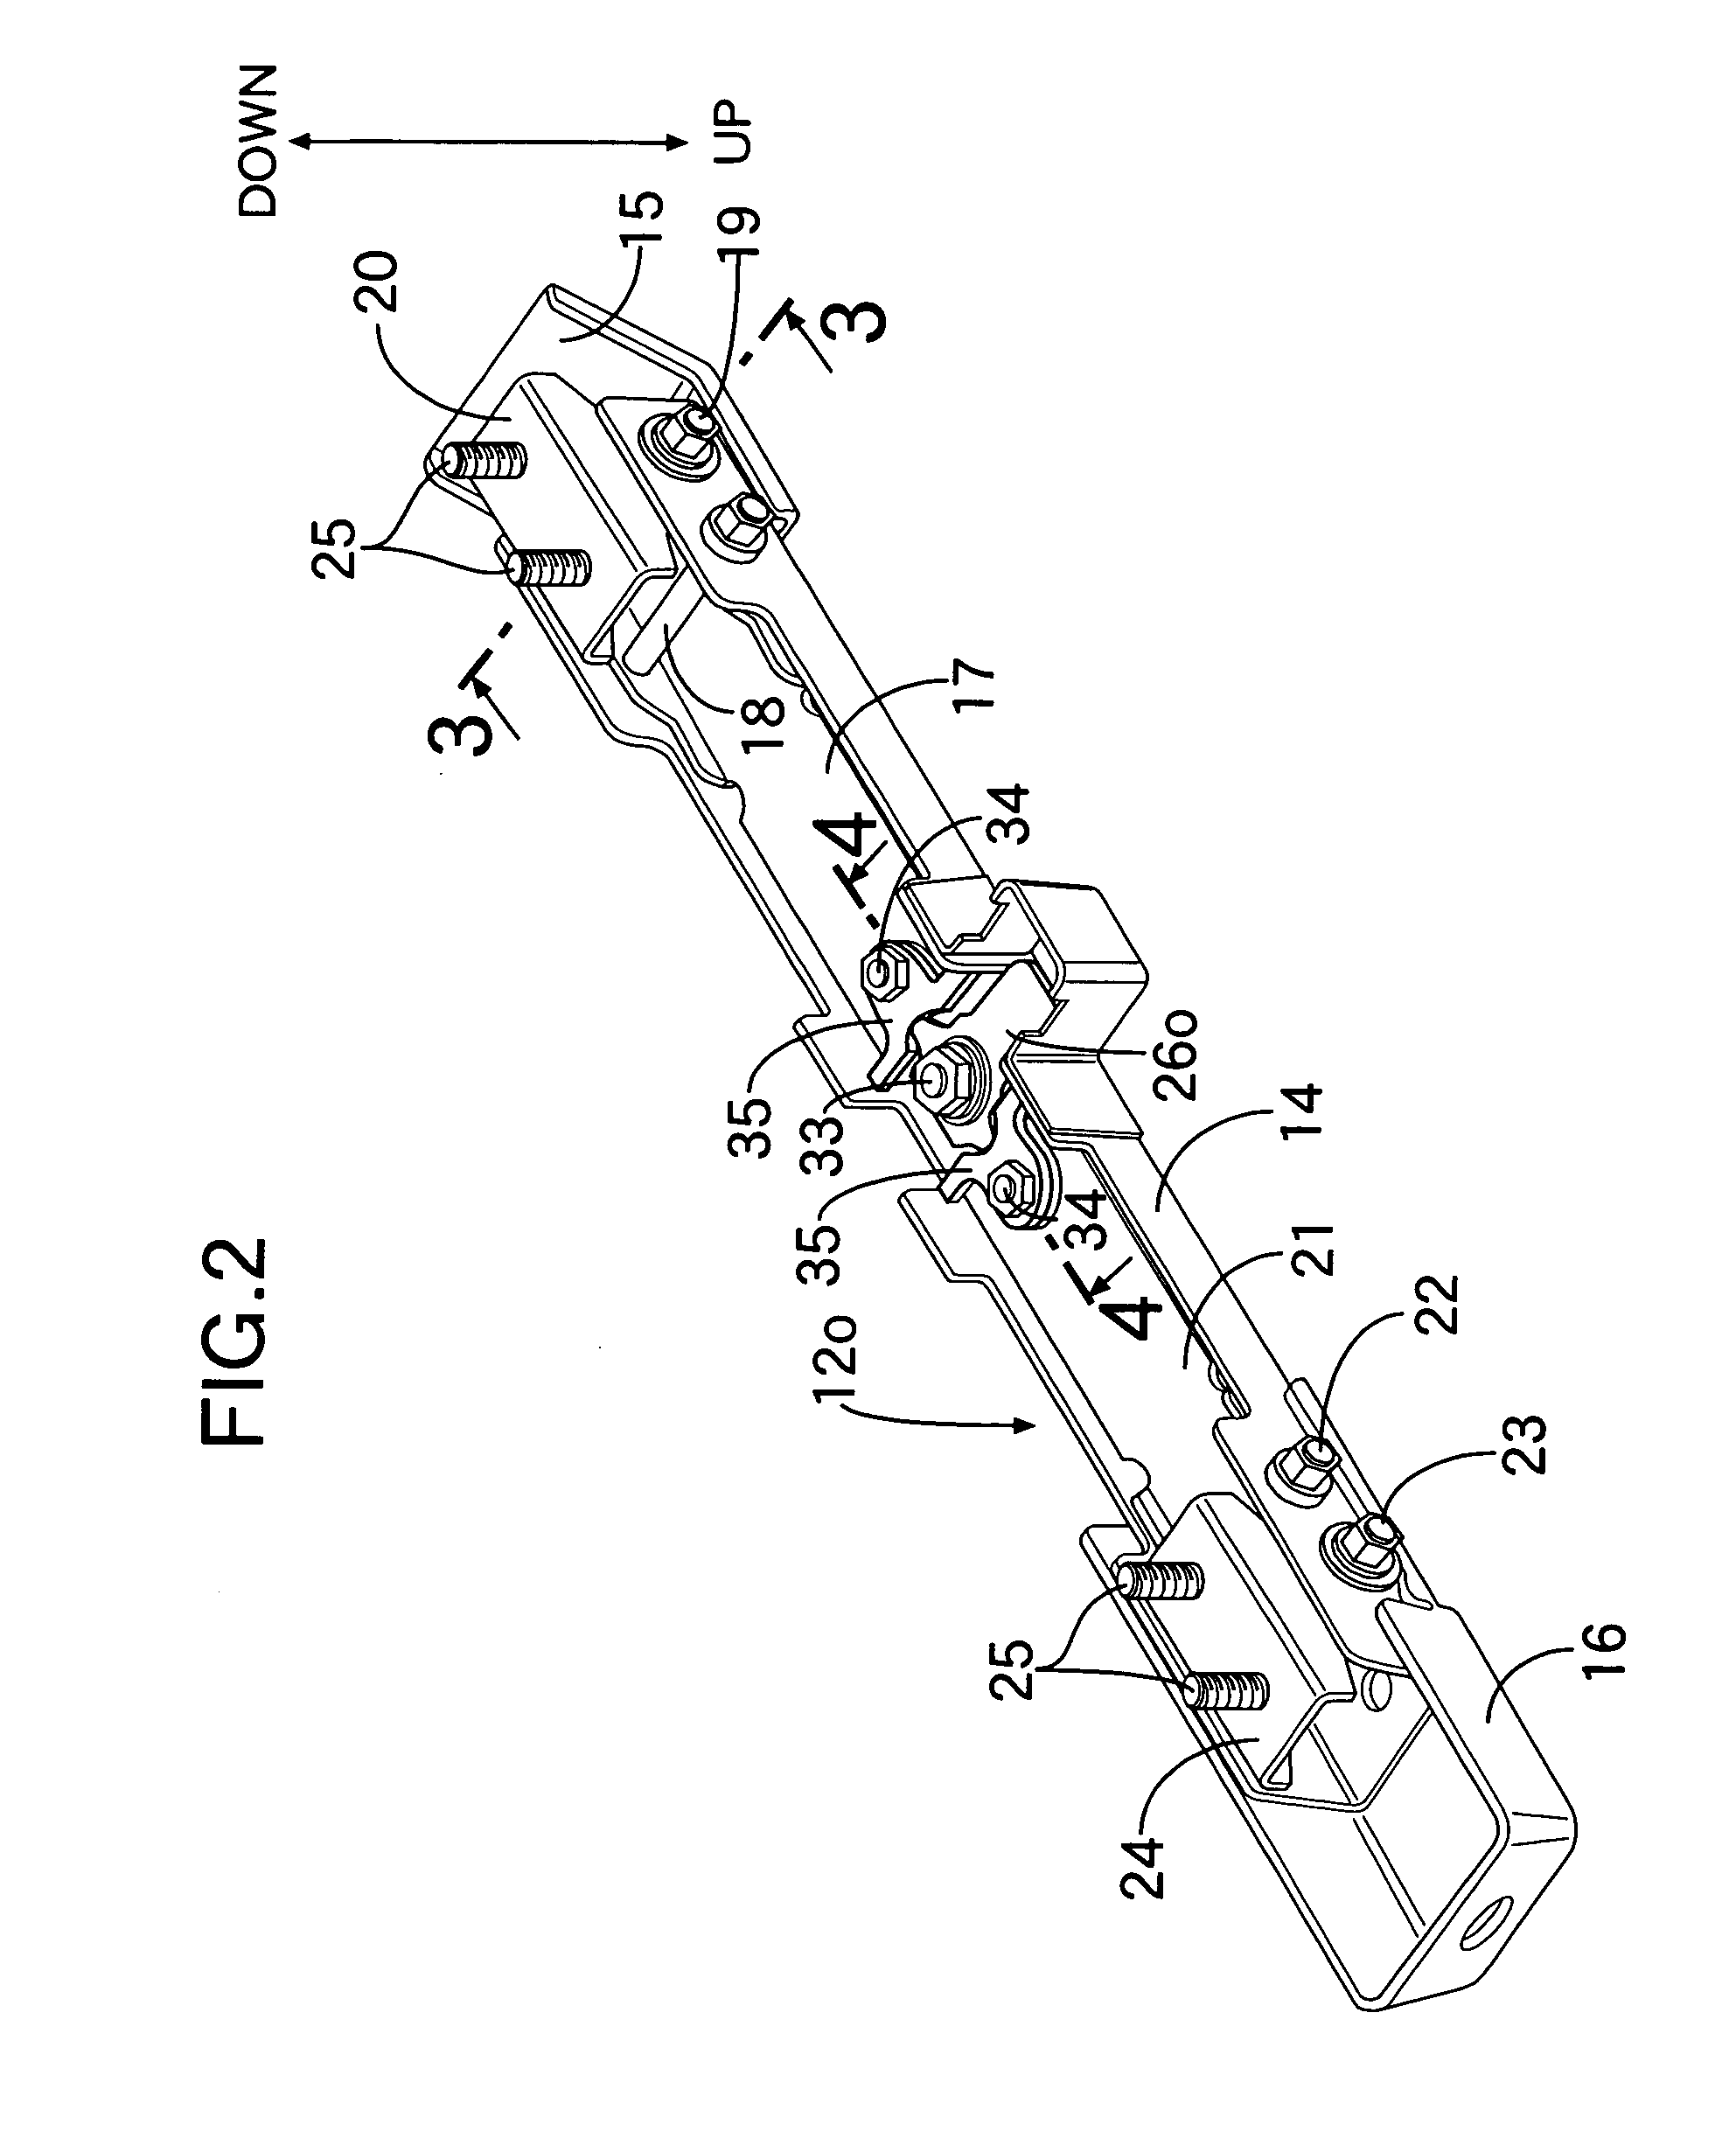 Occupant weight detection system having linked weight detection means with maintained positional relationships